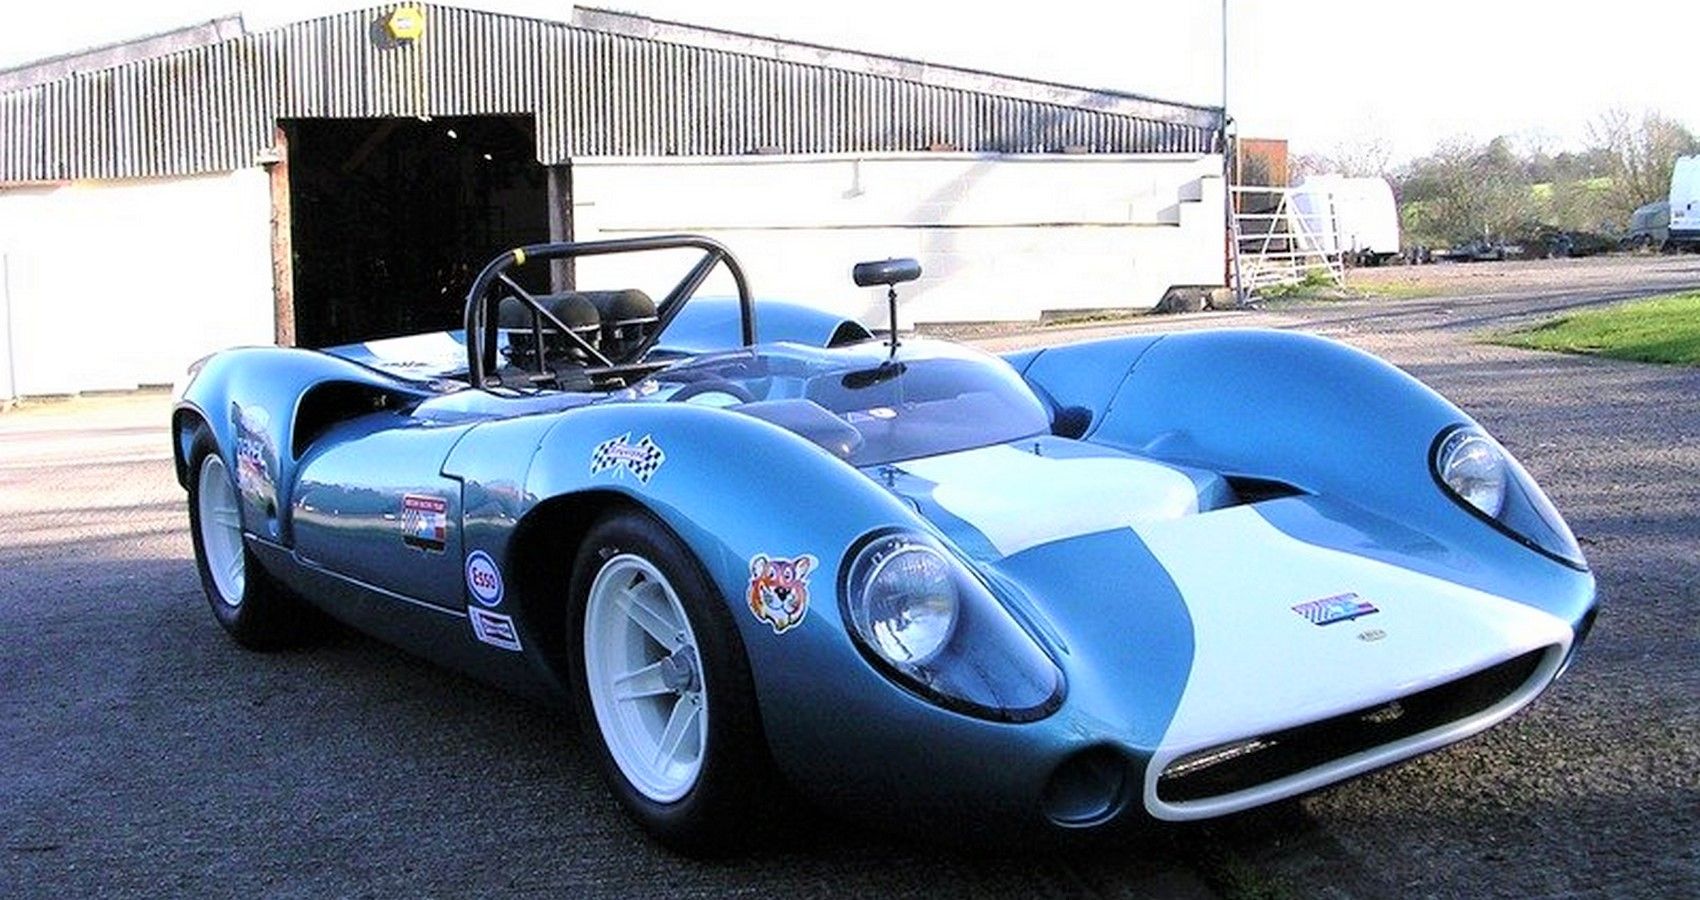 Lola T70 - Front